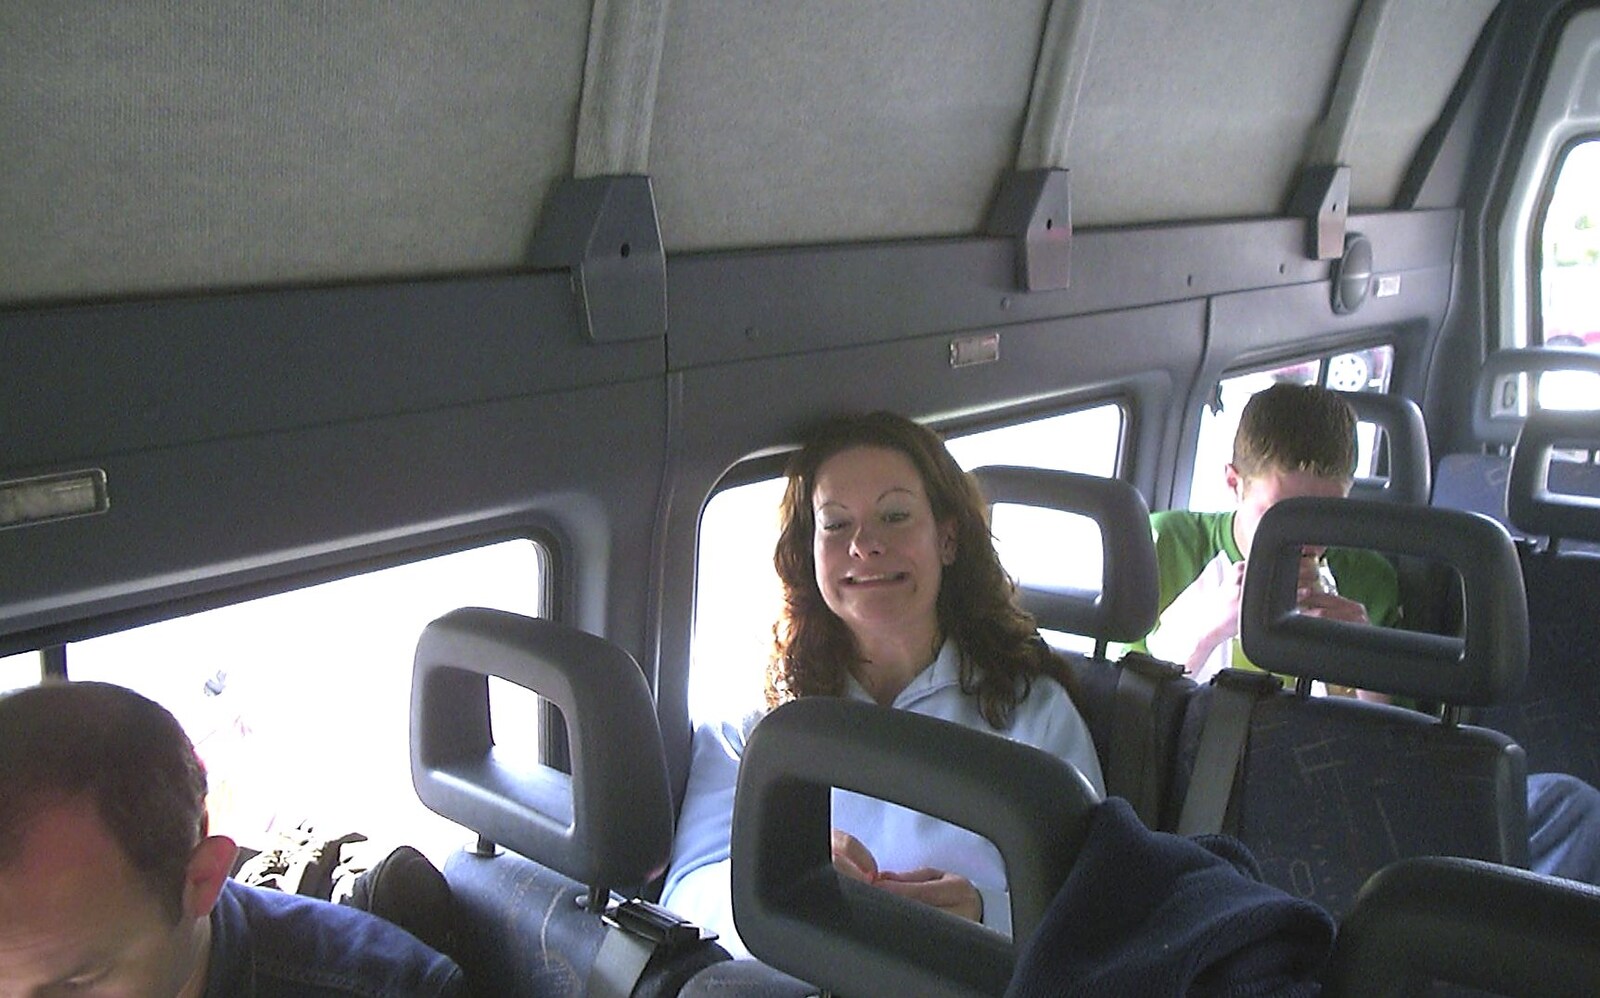 A Trip to Alton Towers, Staffordshire - 19th June 2004: Clare has a freak-out in the minibus